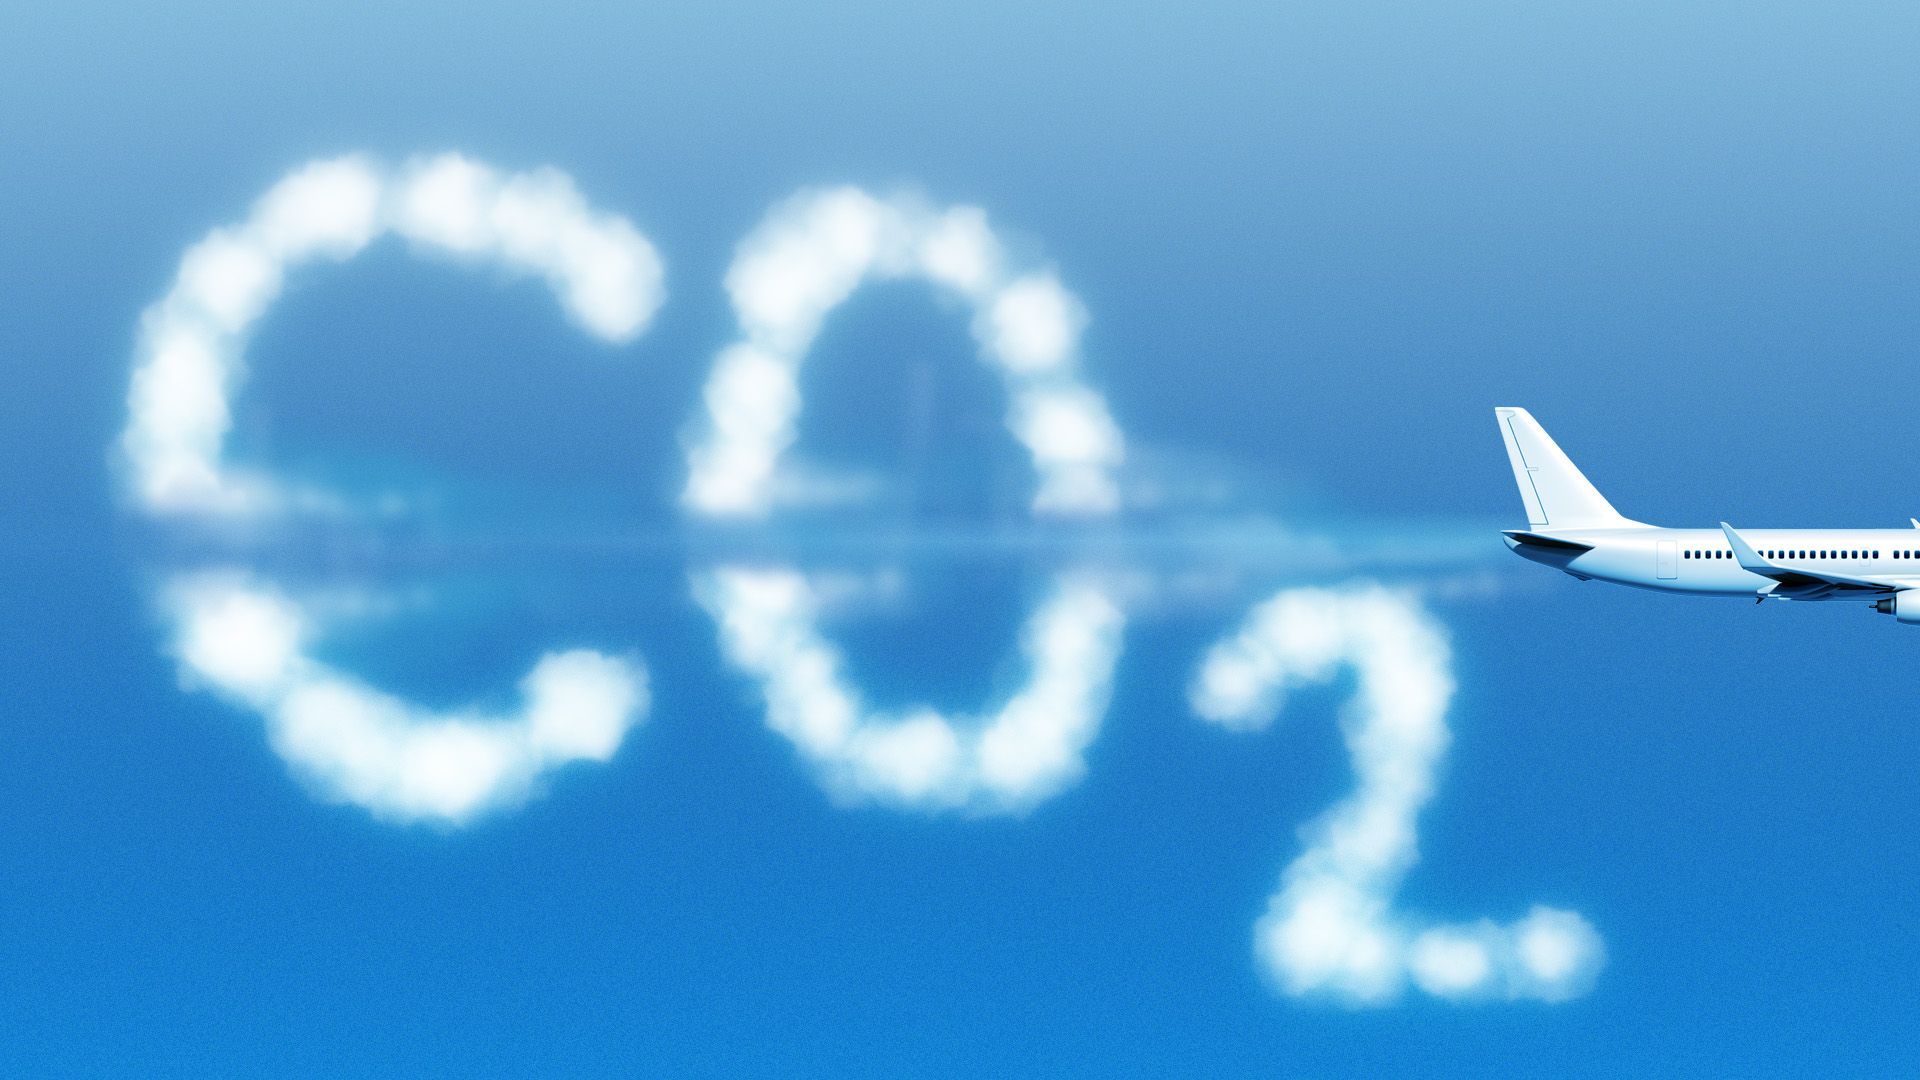 Illustration of an airplane flying through a cloud in the shape of the word CO2